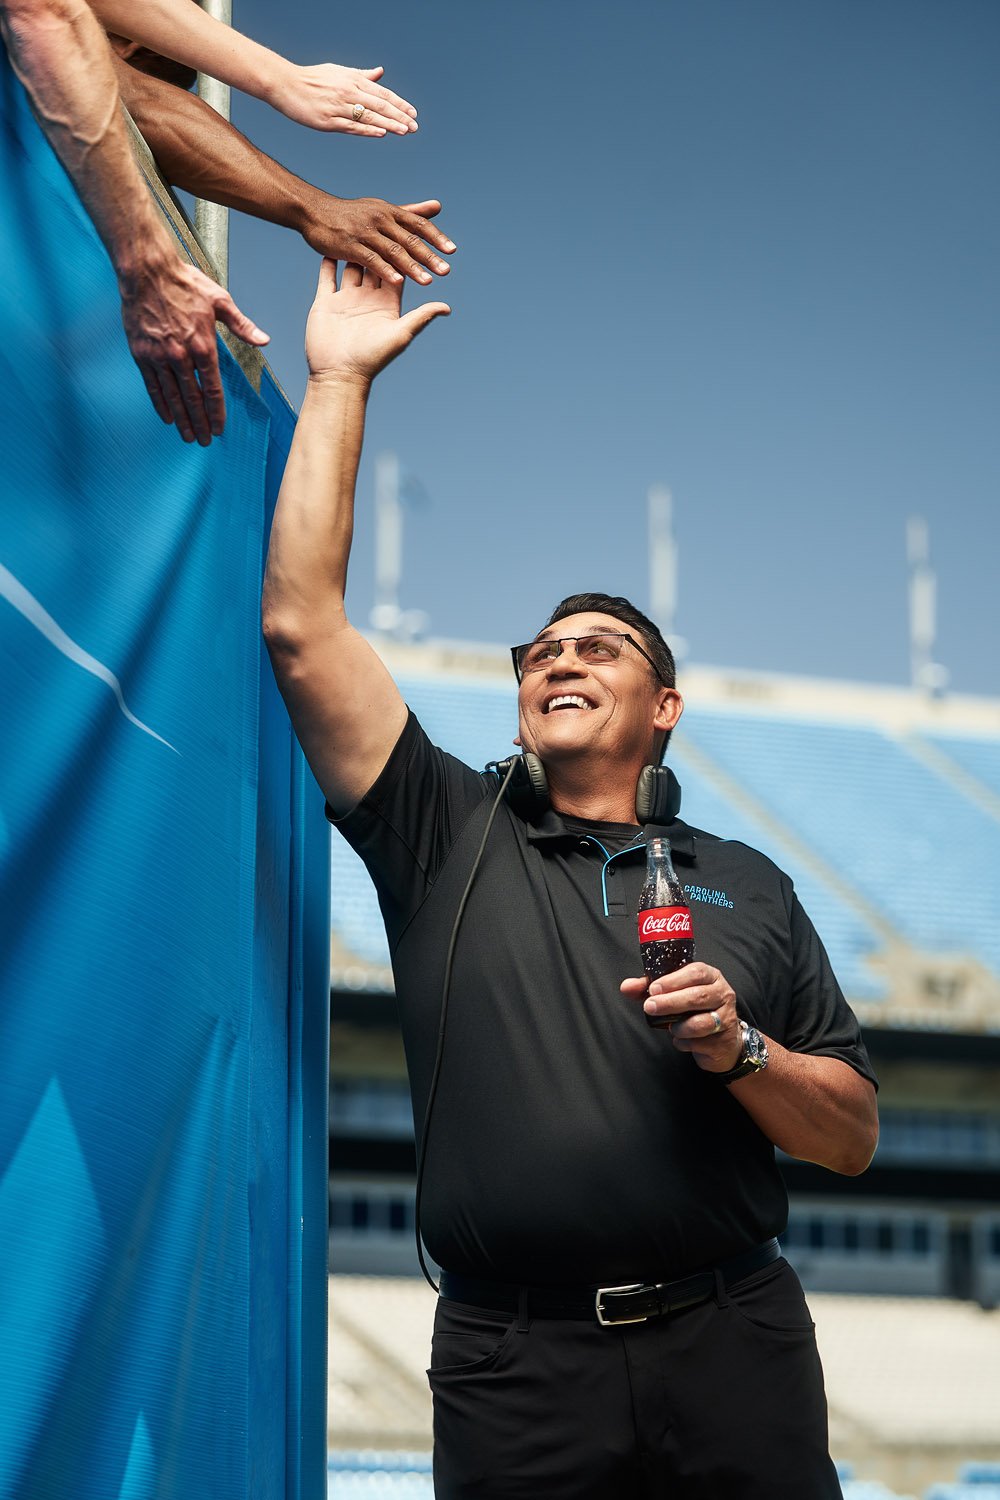 A Carolina Panther's coach giving high-fives to fans while holding a Coca-Cola